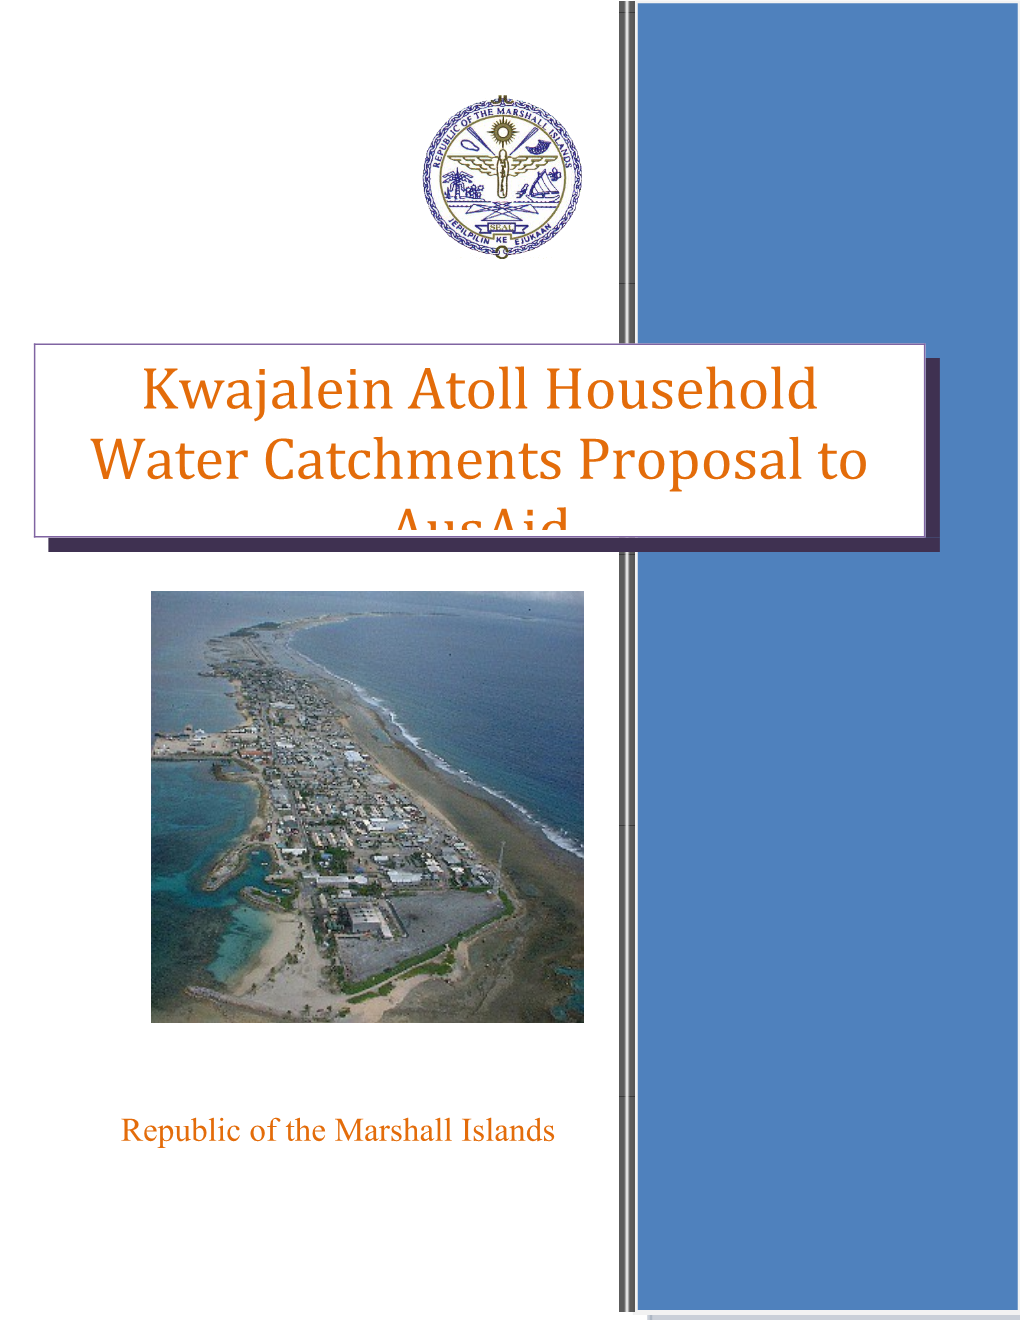 Ebeye 2008 Situation Report & Stabilization Plan